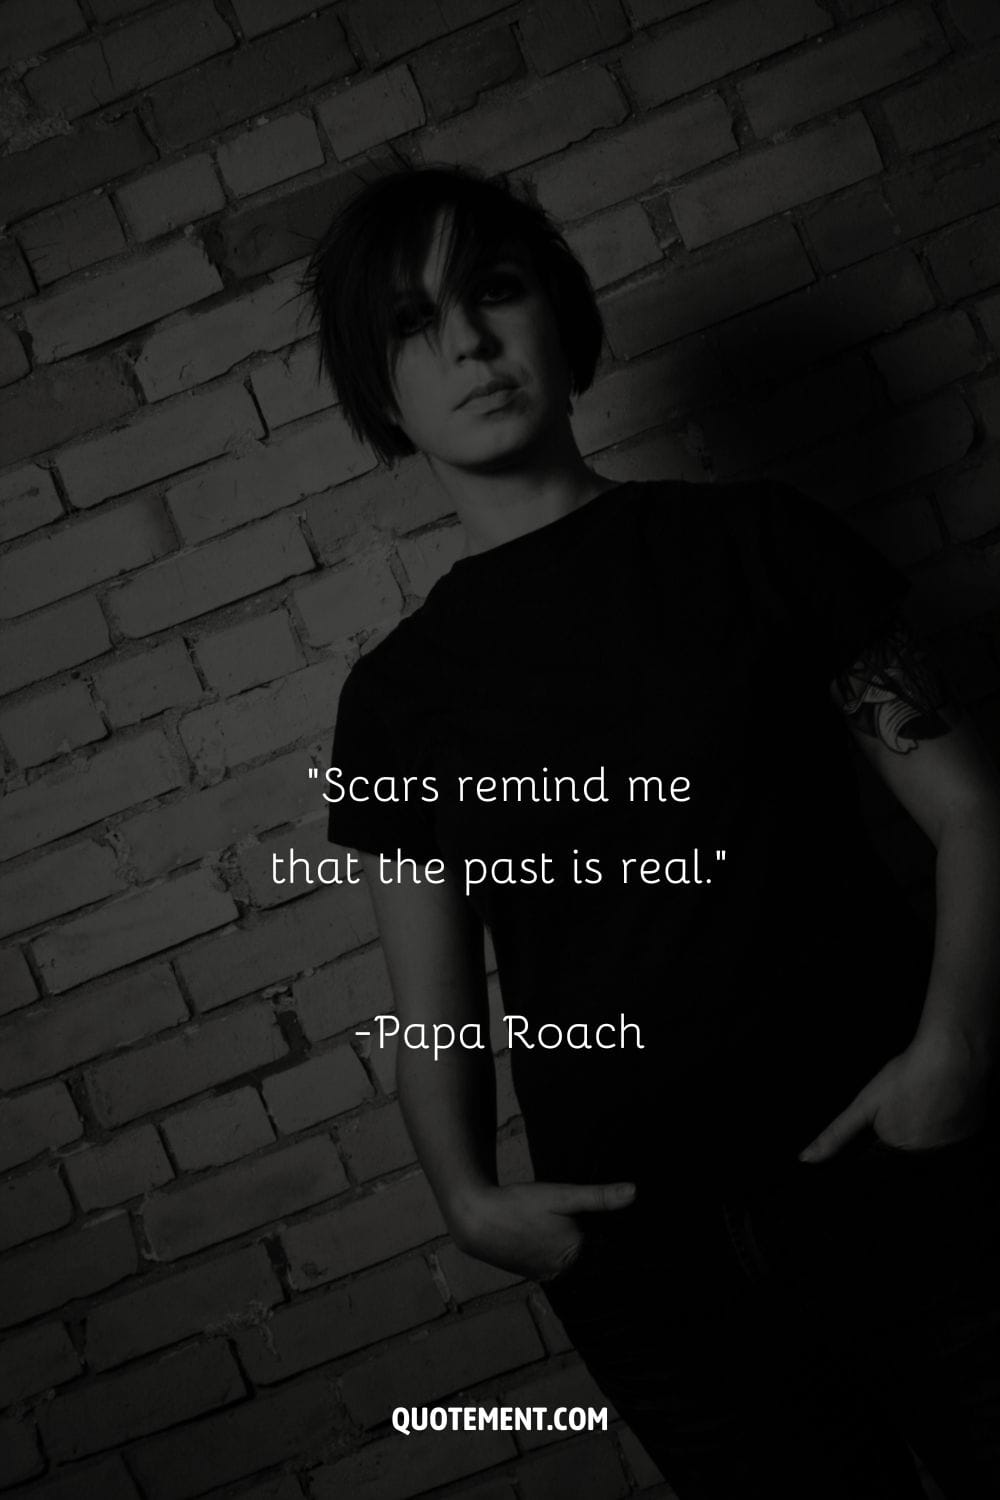 Scars remind me that the past is real.